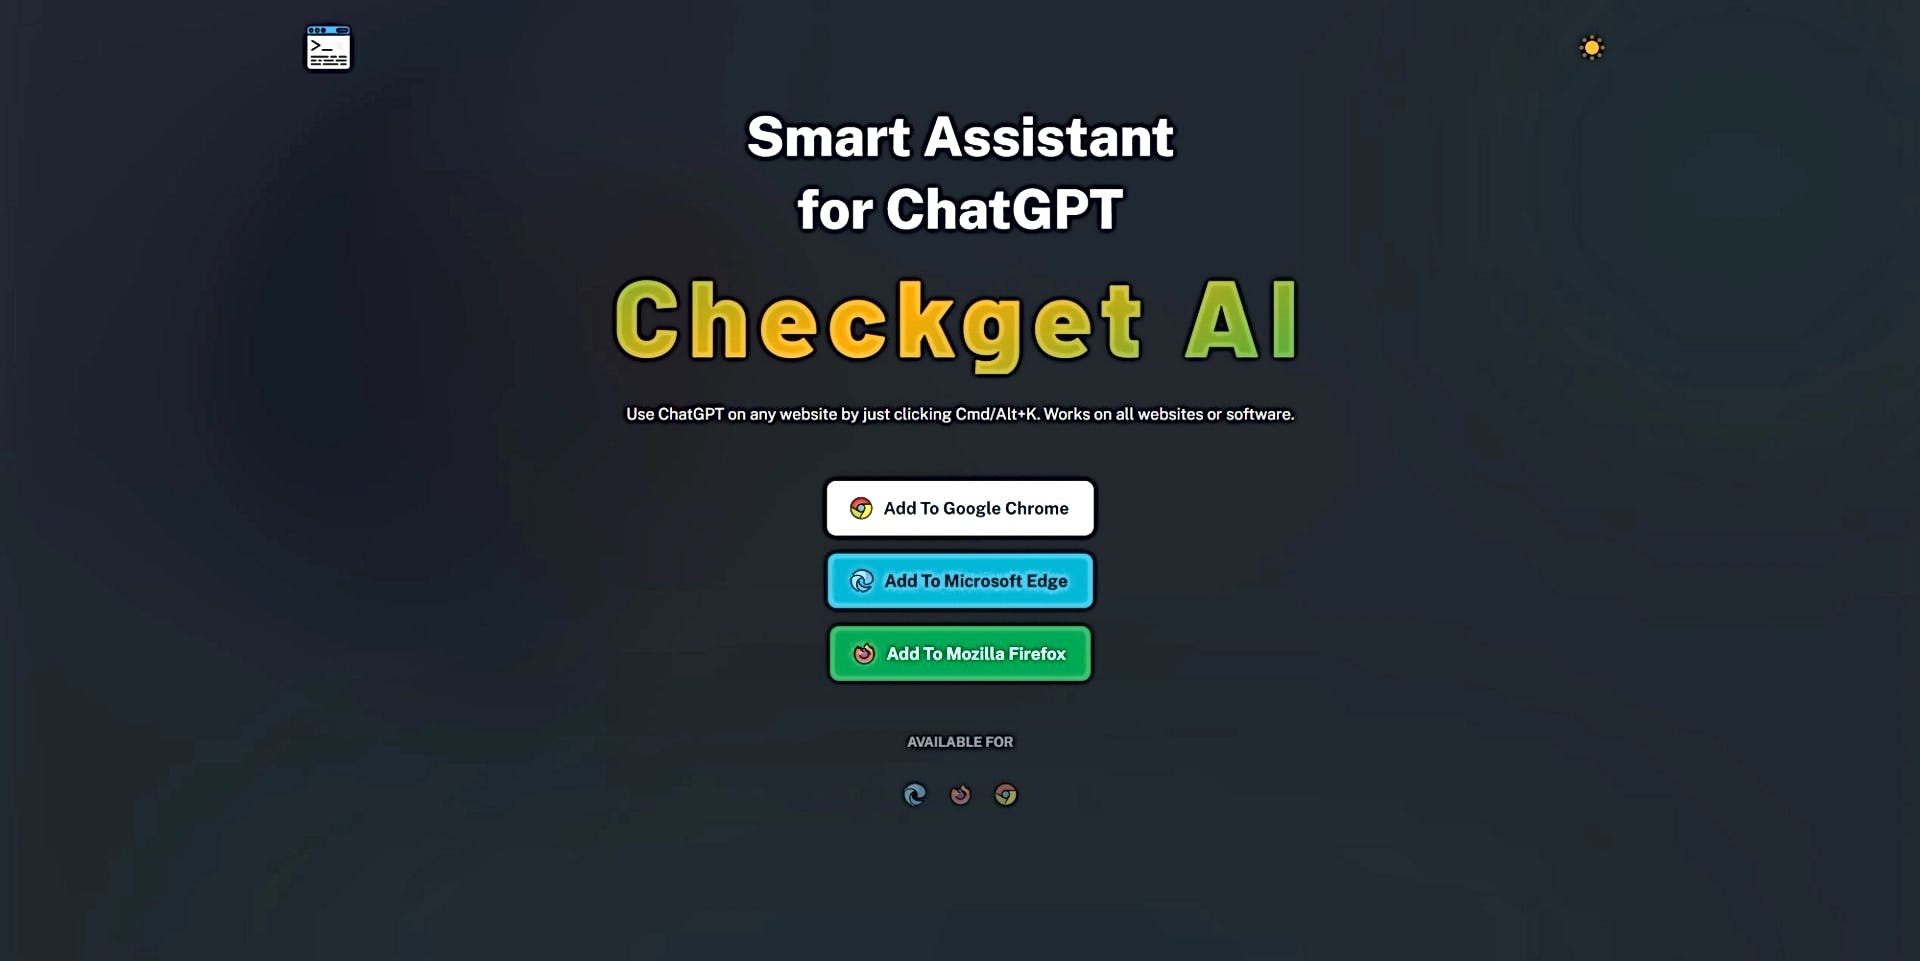 Checkget featured